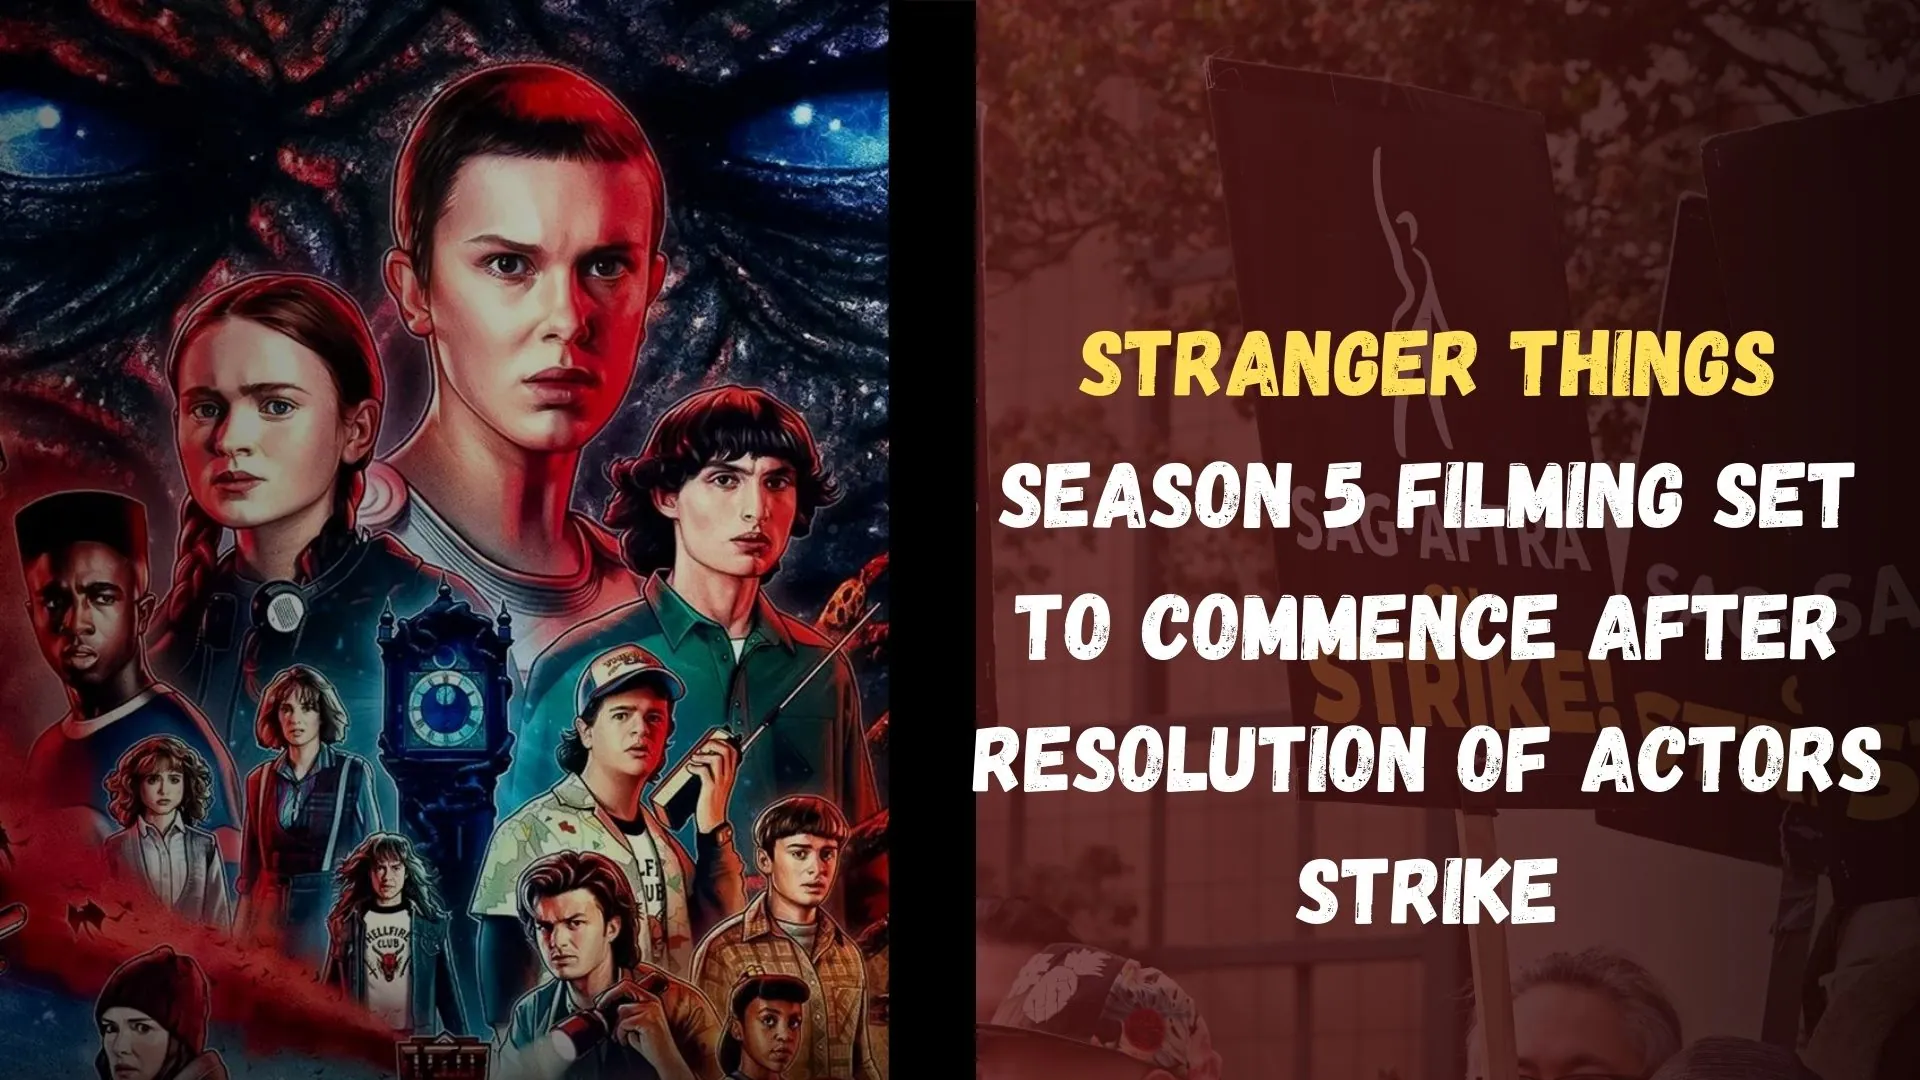 Stranger Things Season 5 Filming Set to Commence After Resolution of Actors Strike